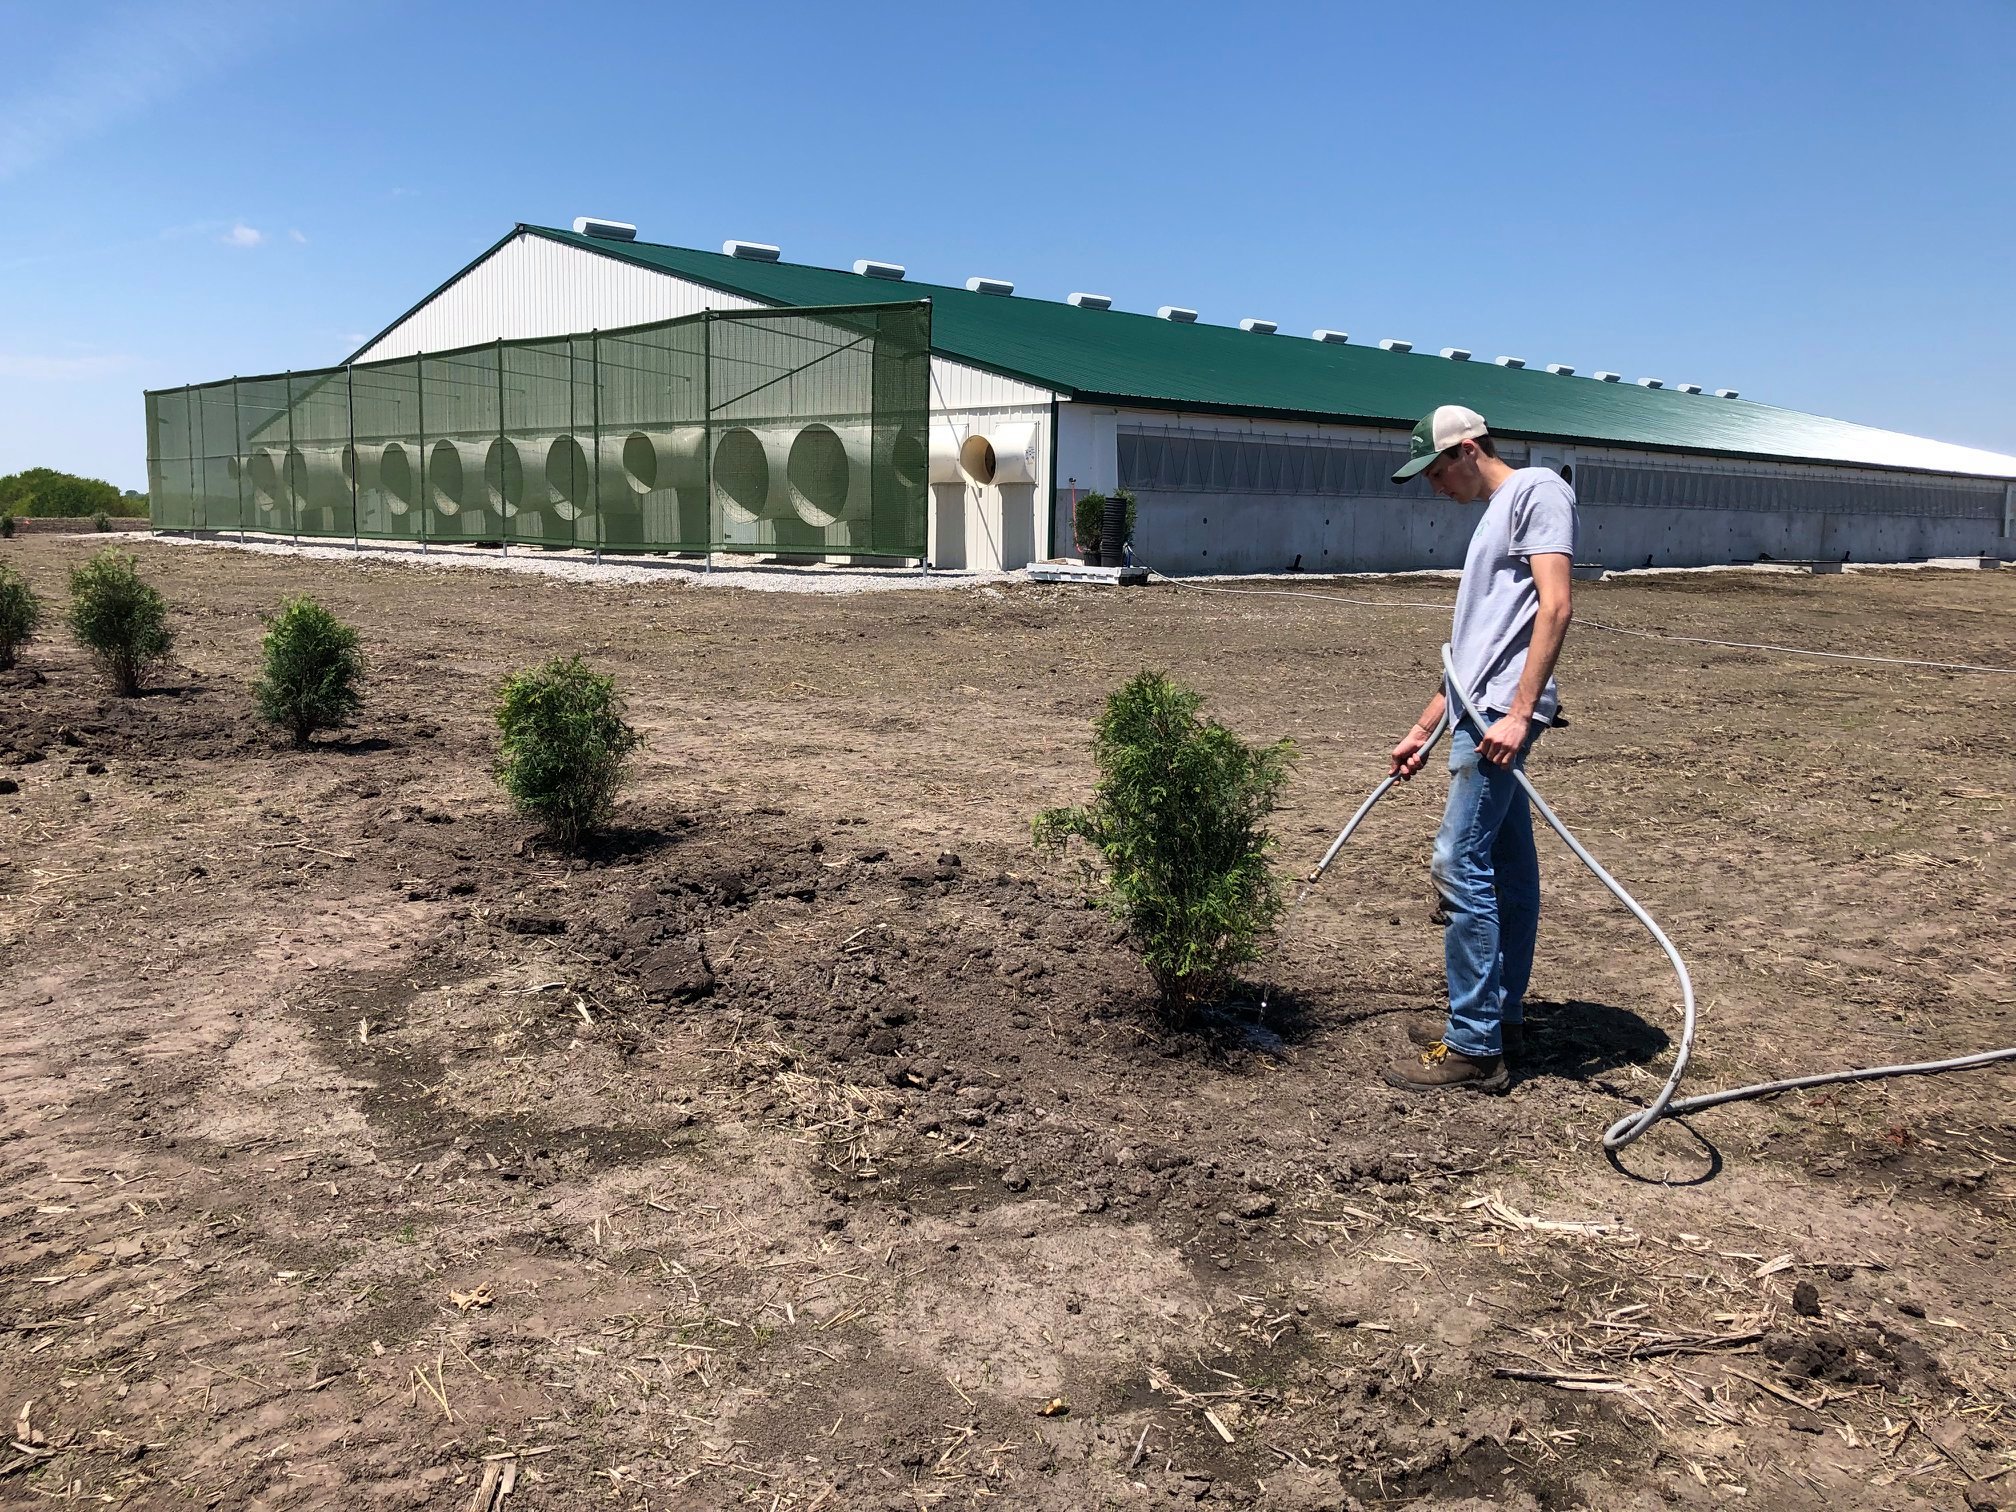 Watering new trees at a new building site